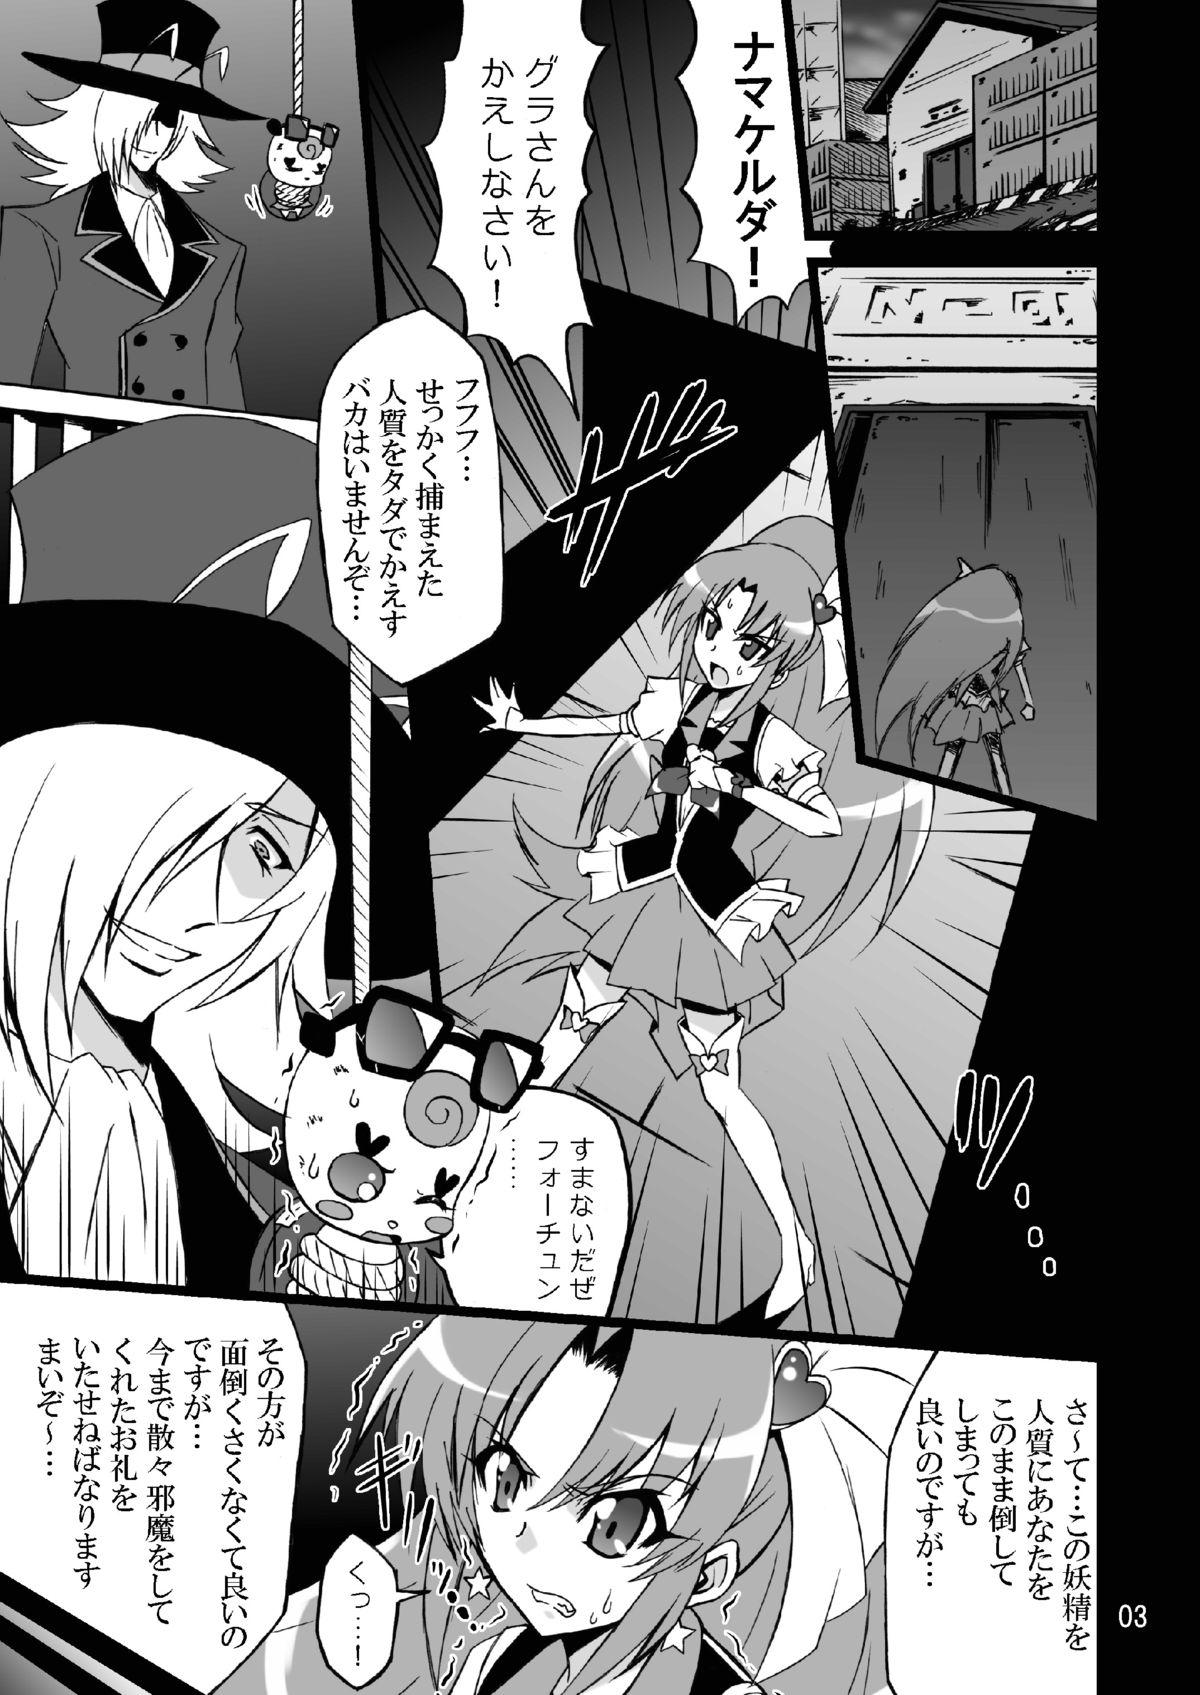 Stepbro WHEEL of FORTUNE - Dokidoki precure Happinesscharge precure Massage - Page 3